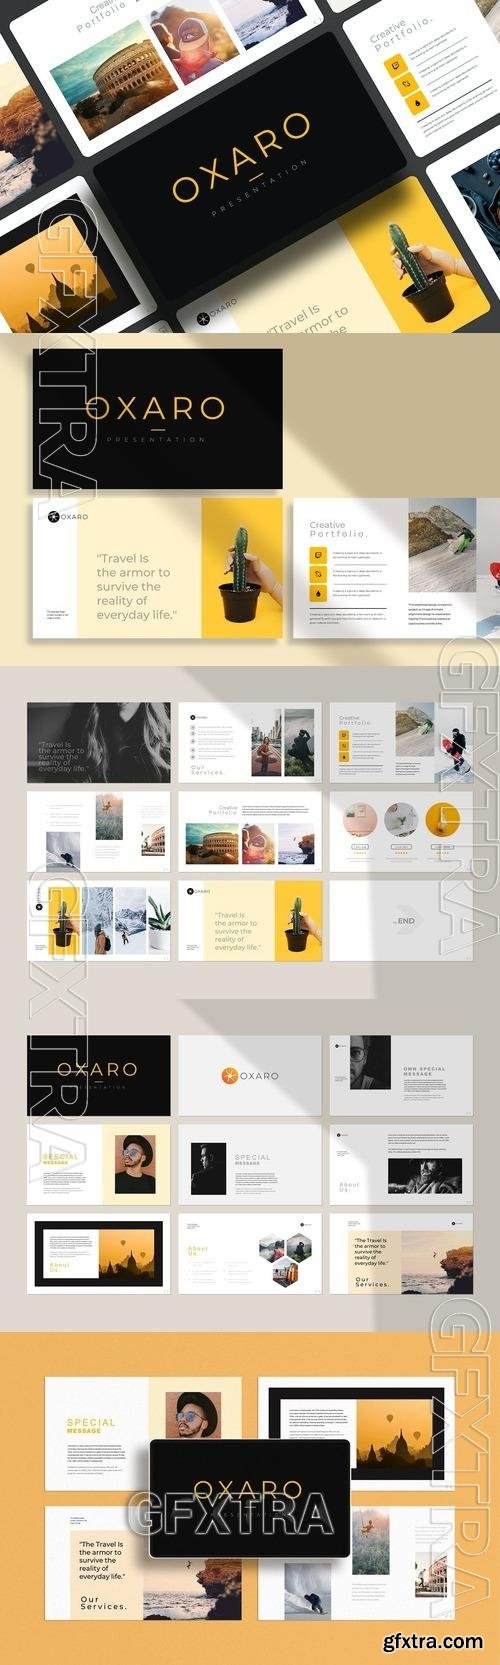 Travel Agency PowerPoint Presentation Template CWLY5WE